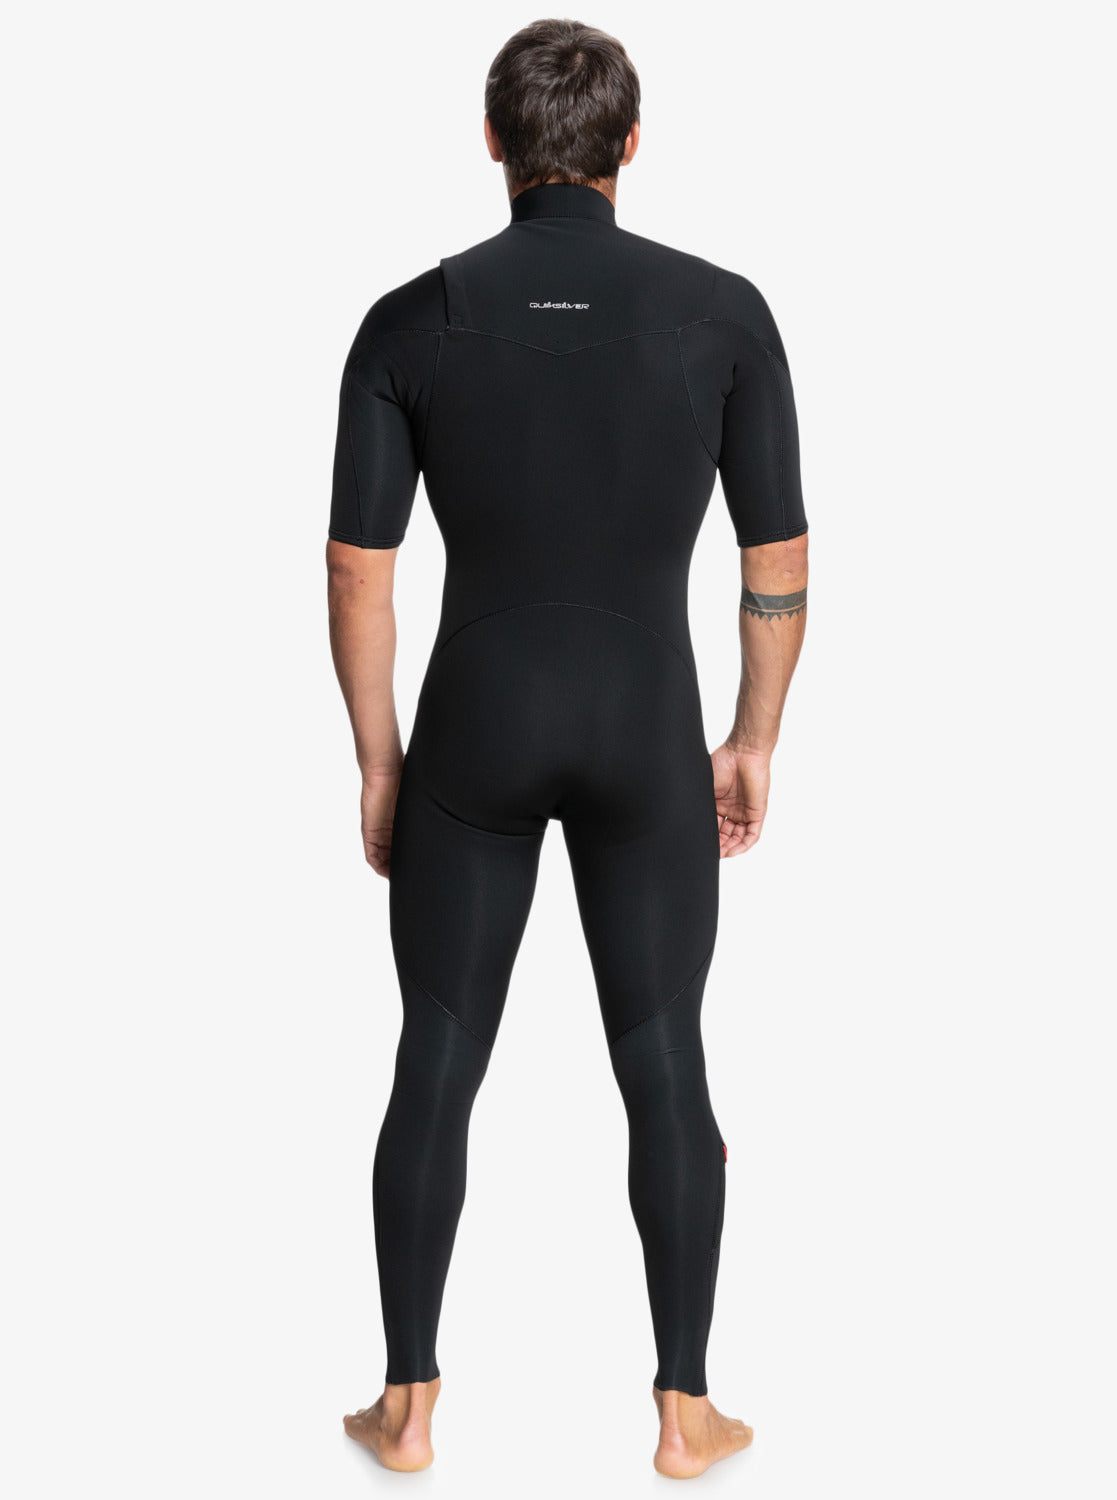 Quiksilver Mens Everyday Session 2/2Mm Chest Zip Wetsuit